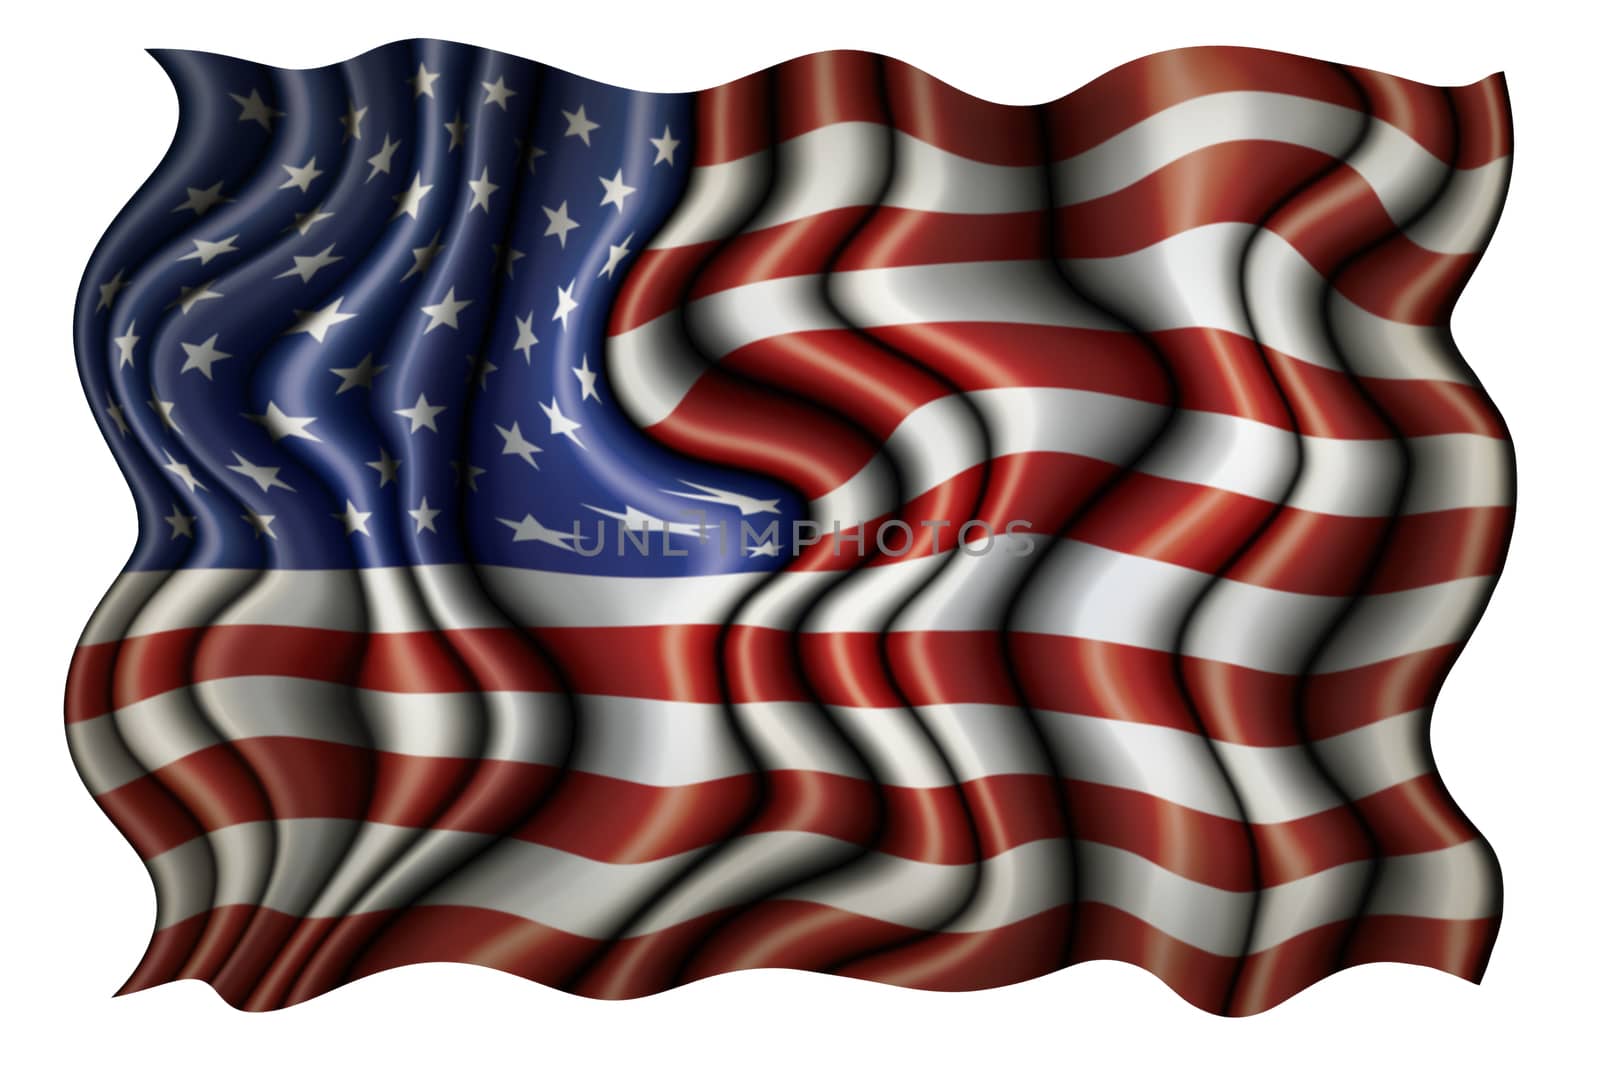 Wavy and convoluted flag of the United States.